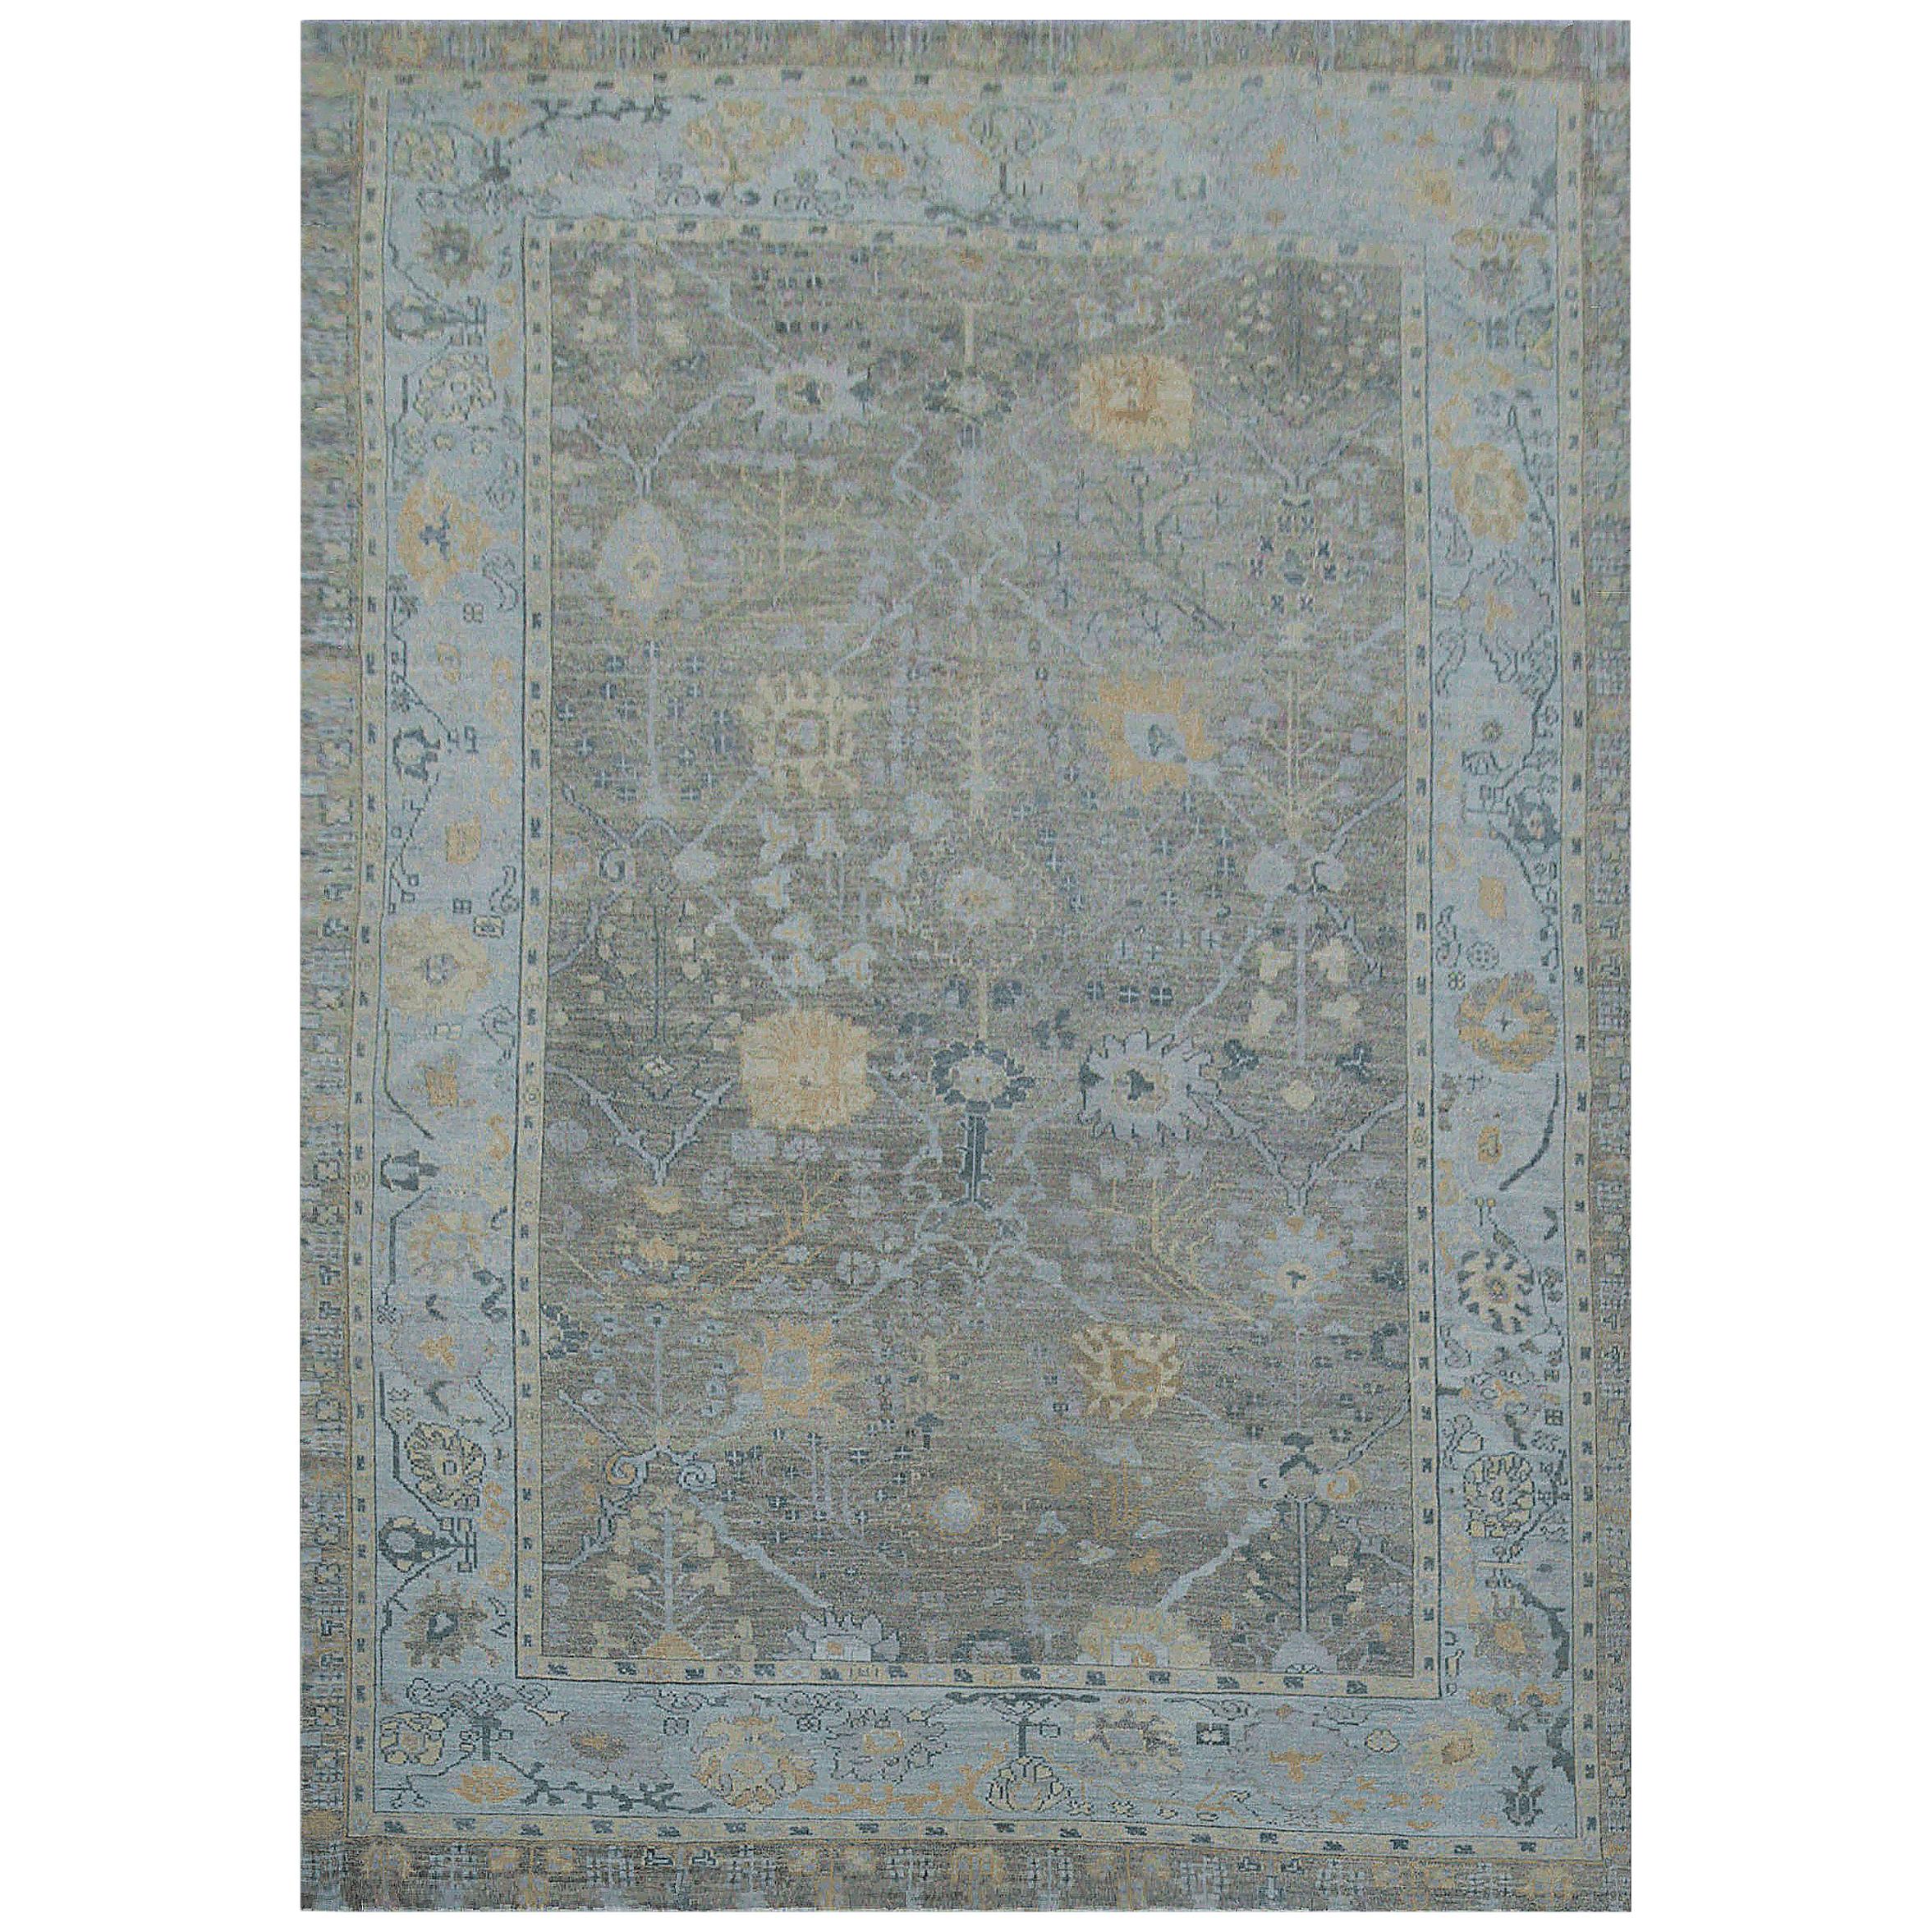 Contemporary Oushak Rug with Gray Field and Blue Border with Floral Motif